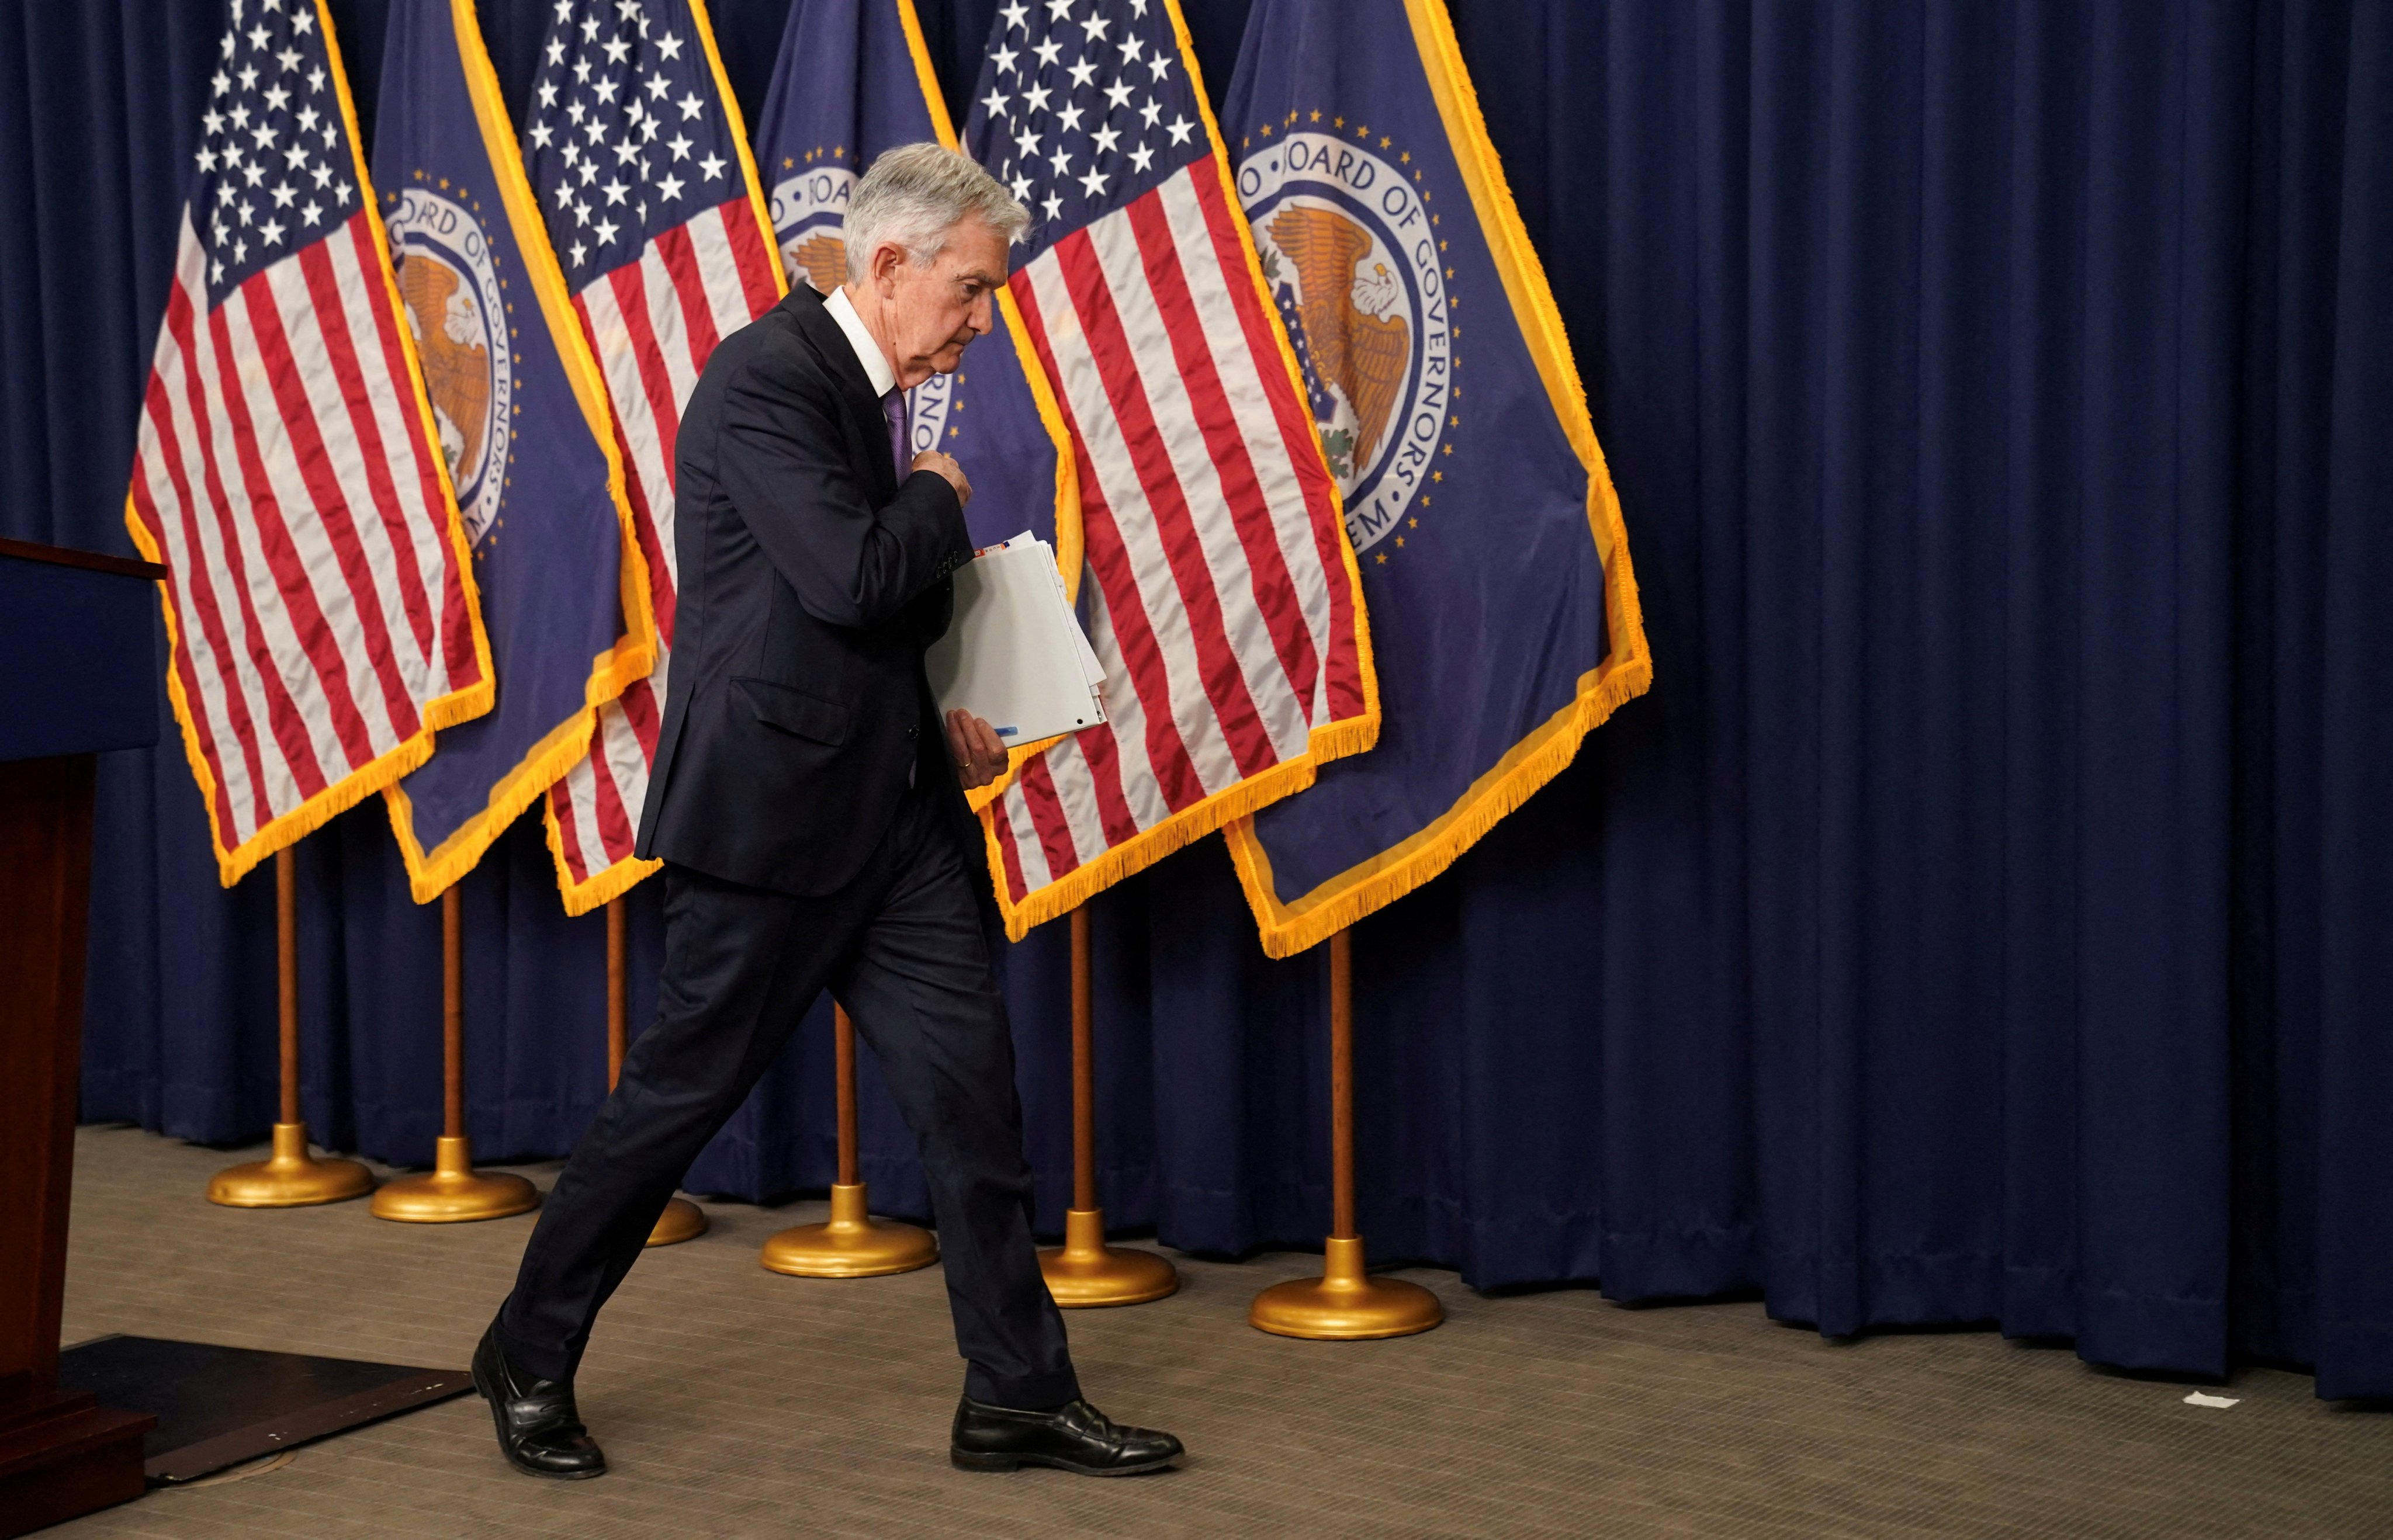 Federal Reserve chairman Jerome Powell leaves a press conference in Washington, US, on December 13. Market optimism buoyed by the Fed’s dovish pivot last month has given way to doubts about its ability and willingness to loosen policy significantly. Photo: Reuters